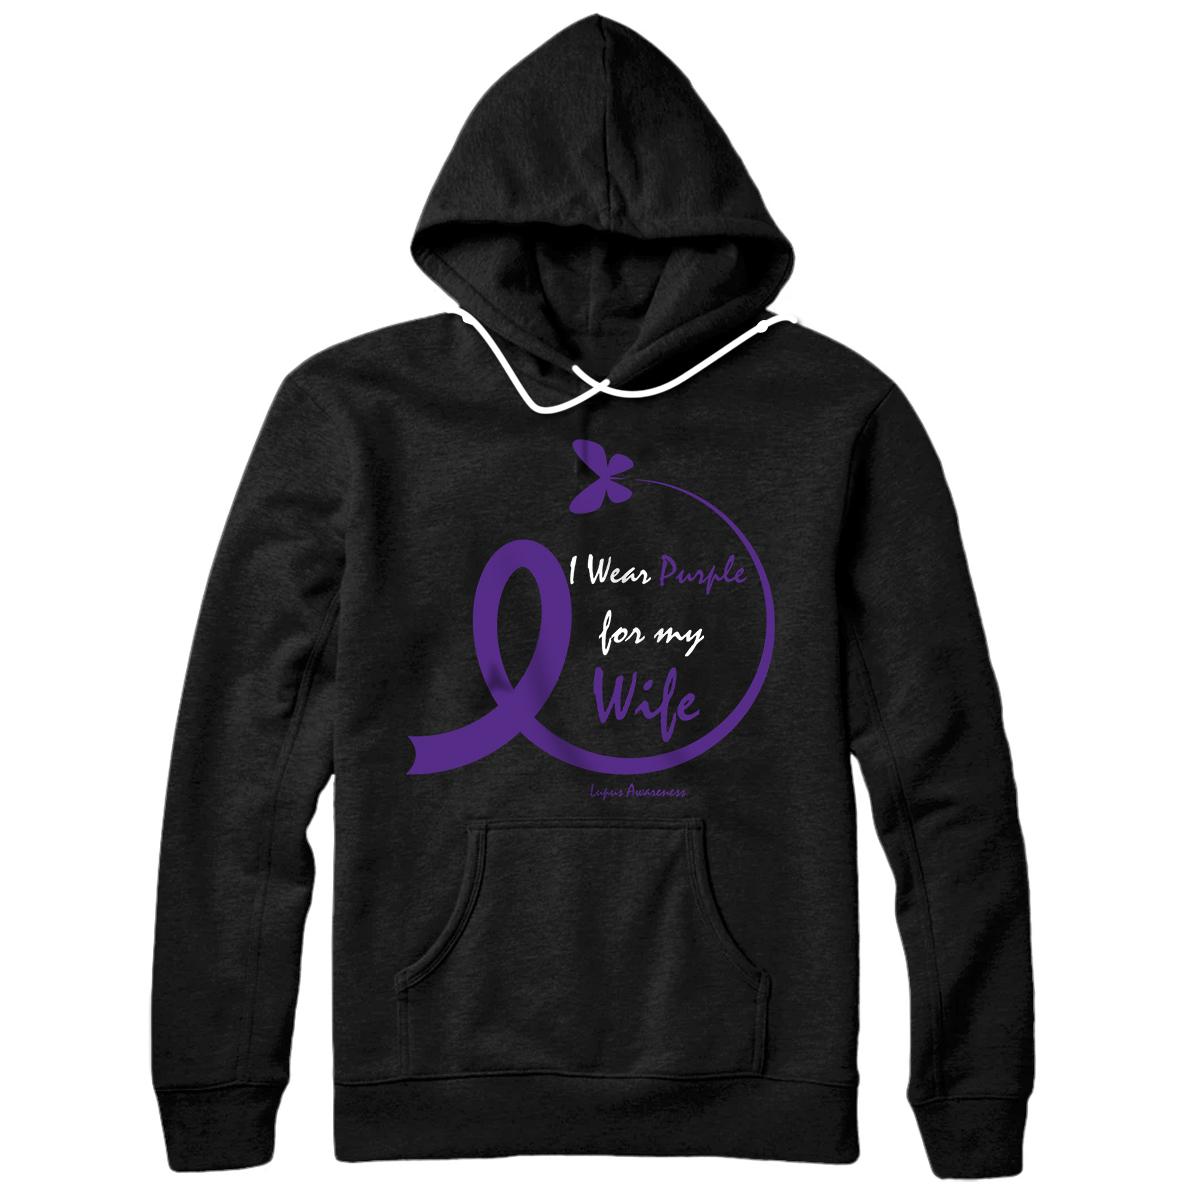 Personalized Products Gifts Husband Men Wear Purple Wife Lupus Awareness Pullover Hoodie